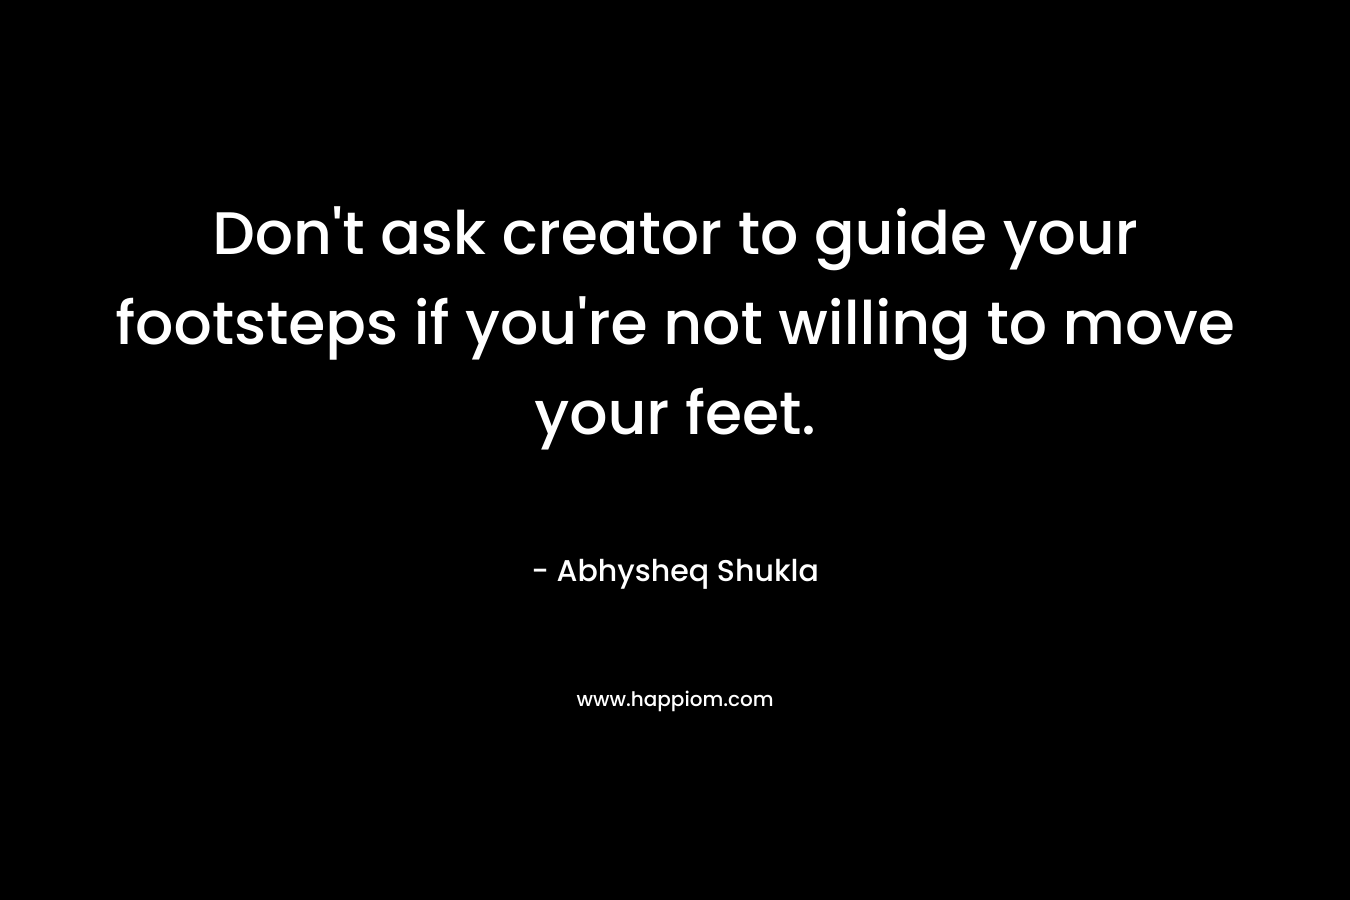 Don't ask creator to guide your footsteps if you're not willing to move your feet.